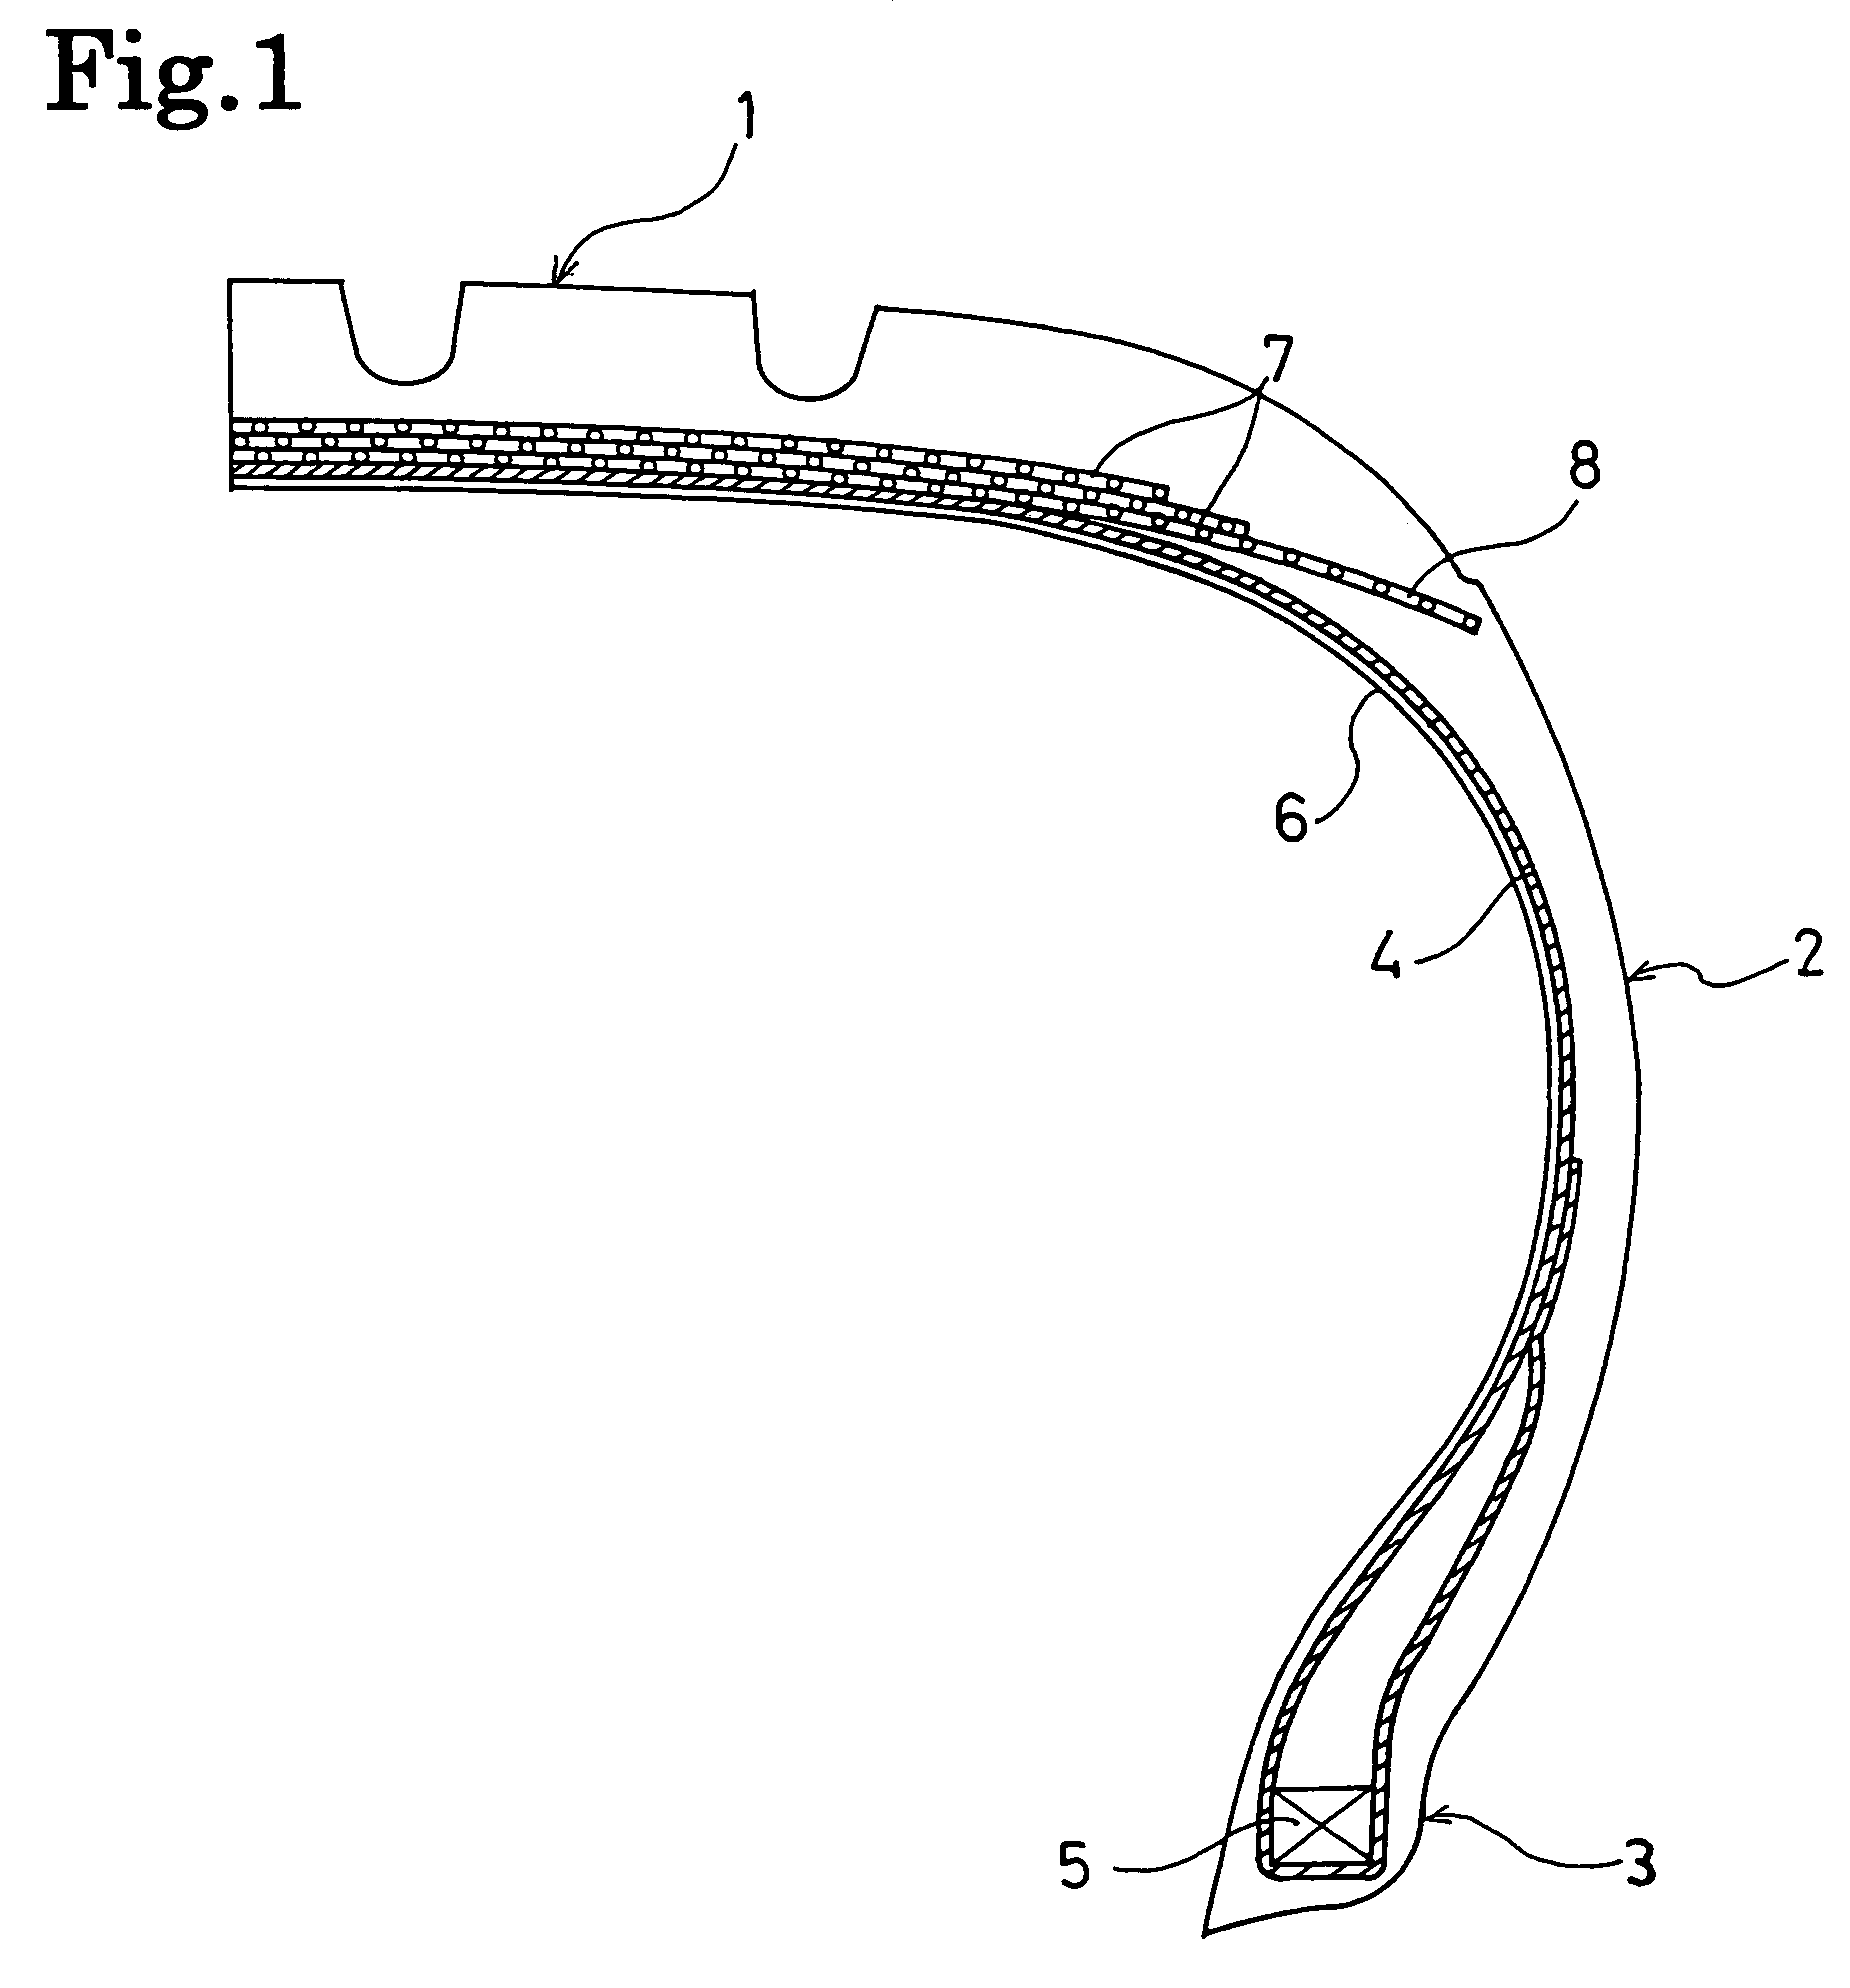 Pneumatic tire with wound cord layer between carcass layer and belt layers